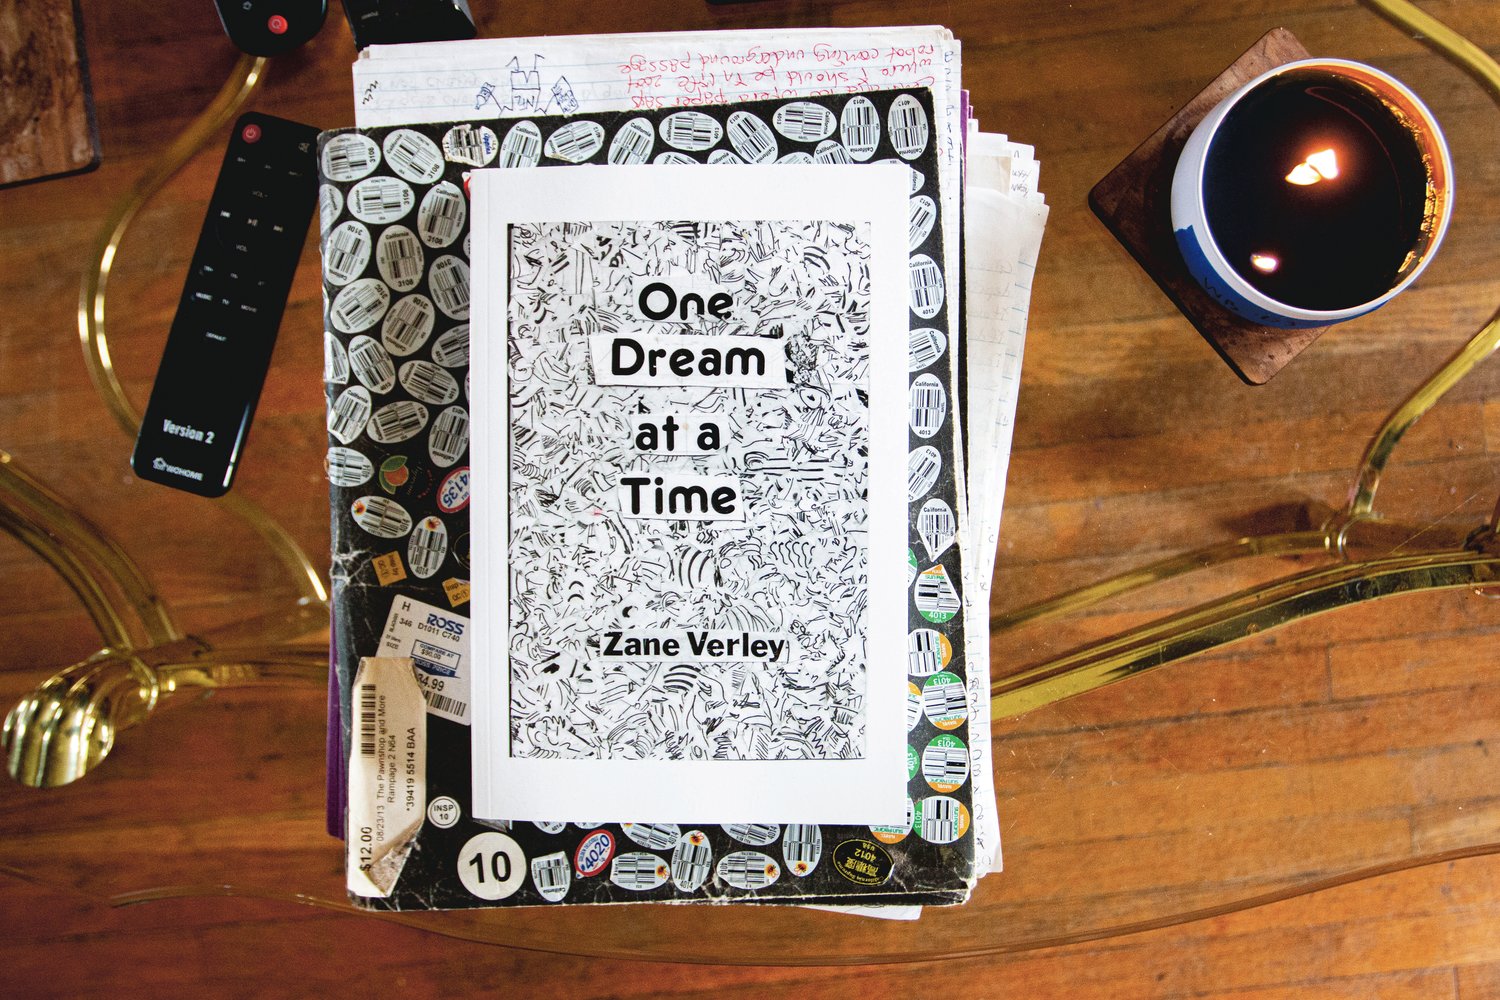 Zane’s Verley’s book, “One Dream at a Time,” can be purchased directly from him. He keeps copies of the book when working at McFiler’s or you can give him a call at 360-523-4804.